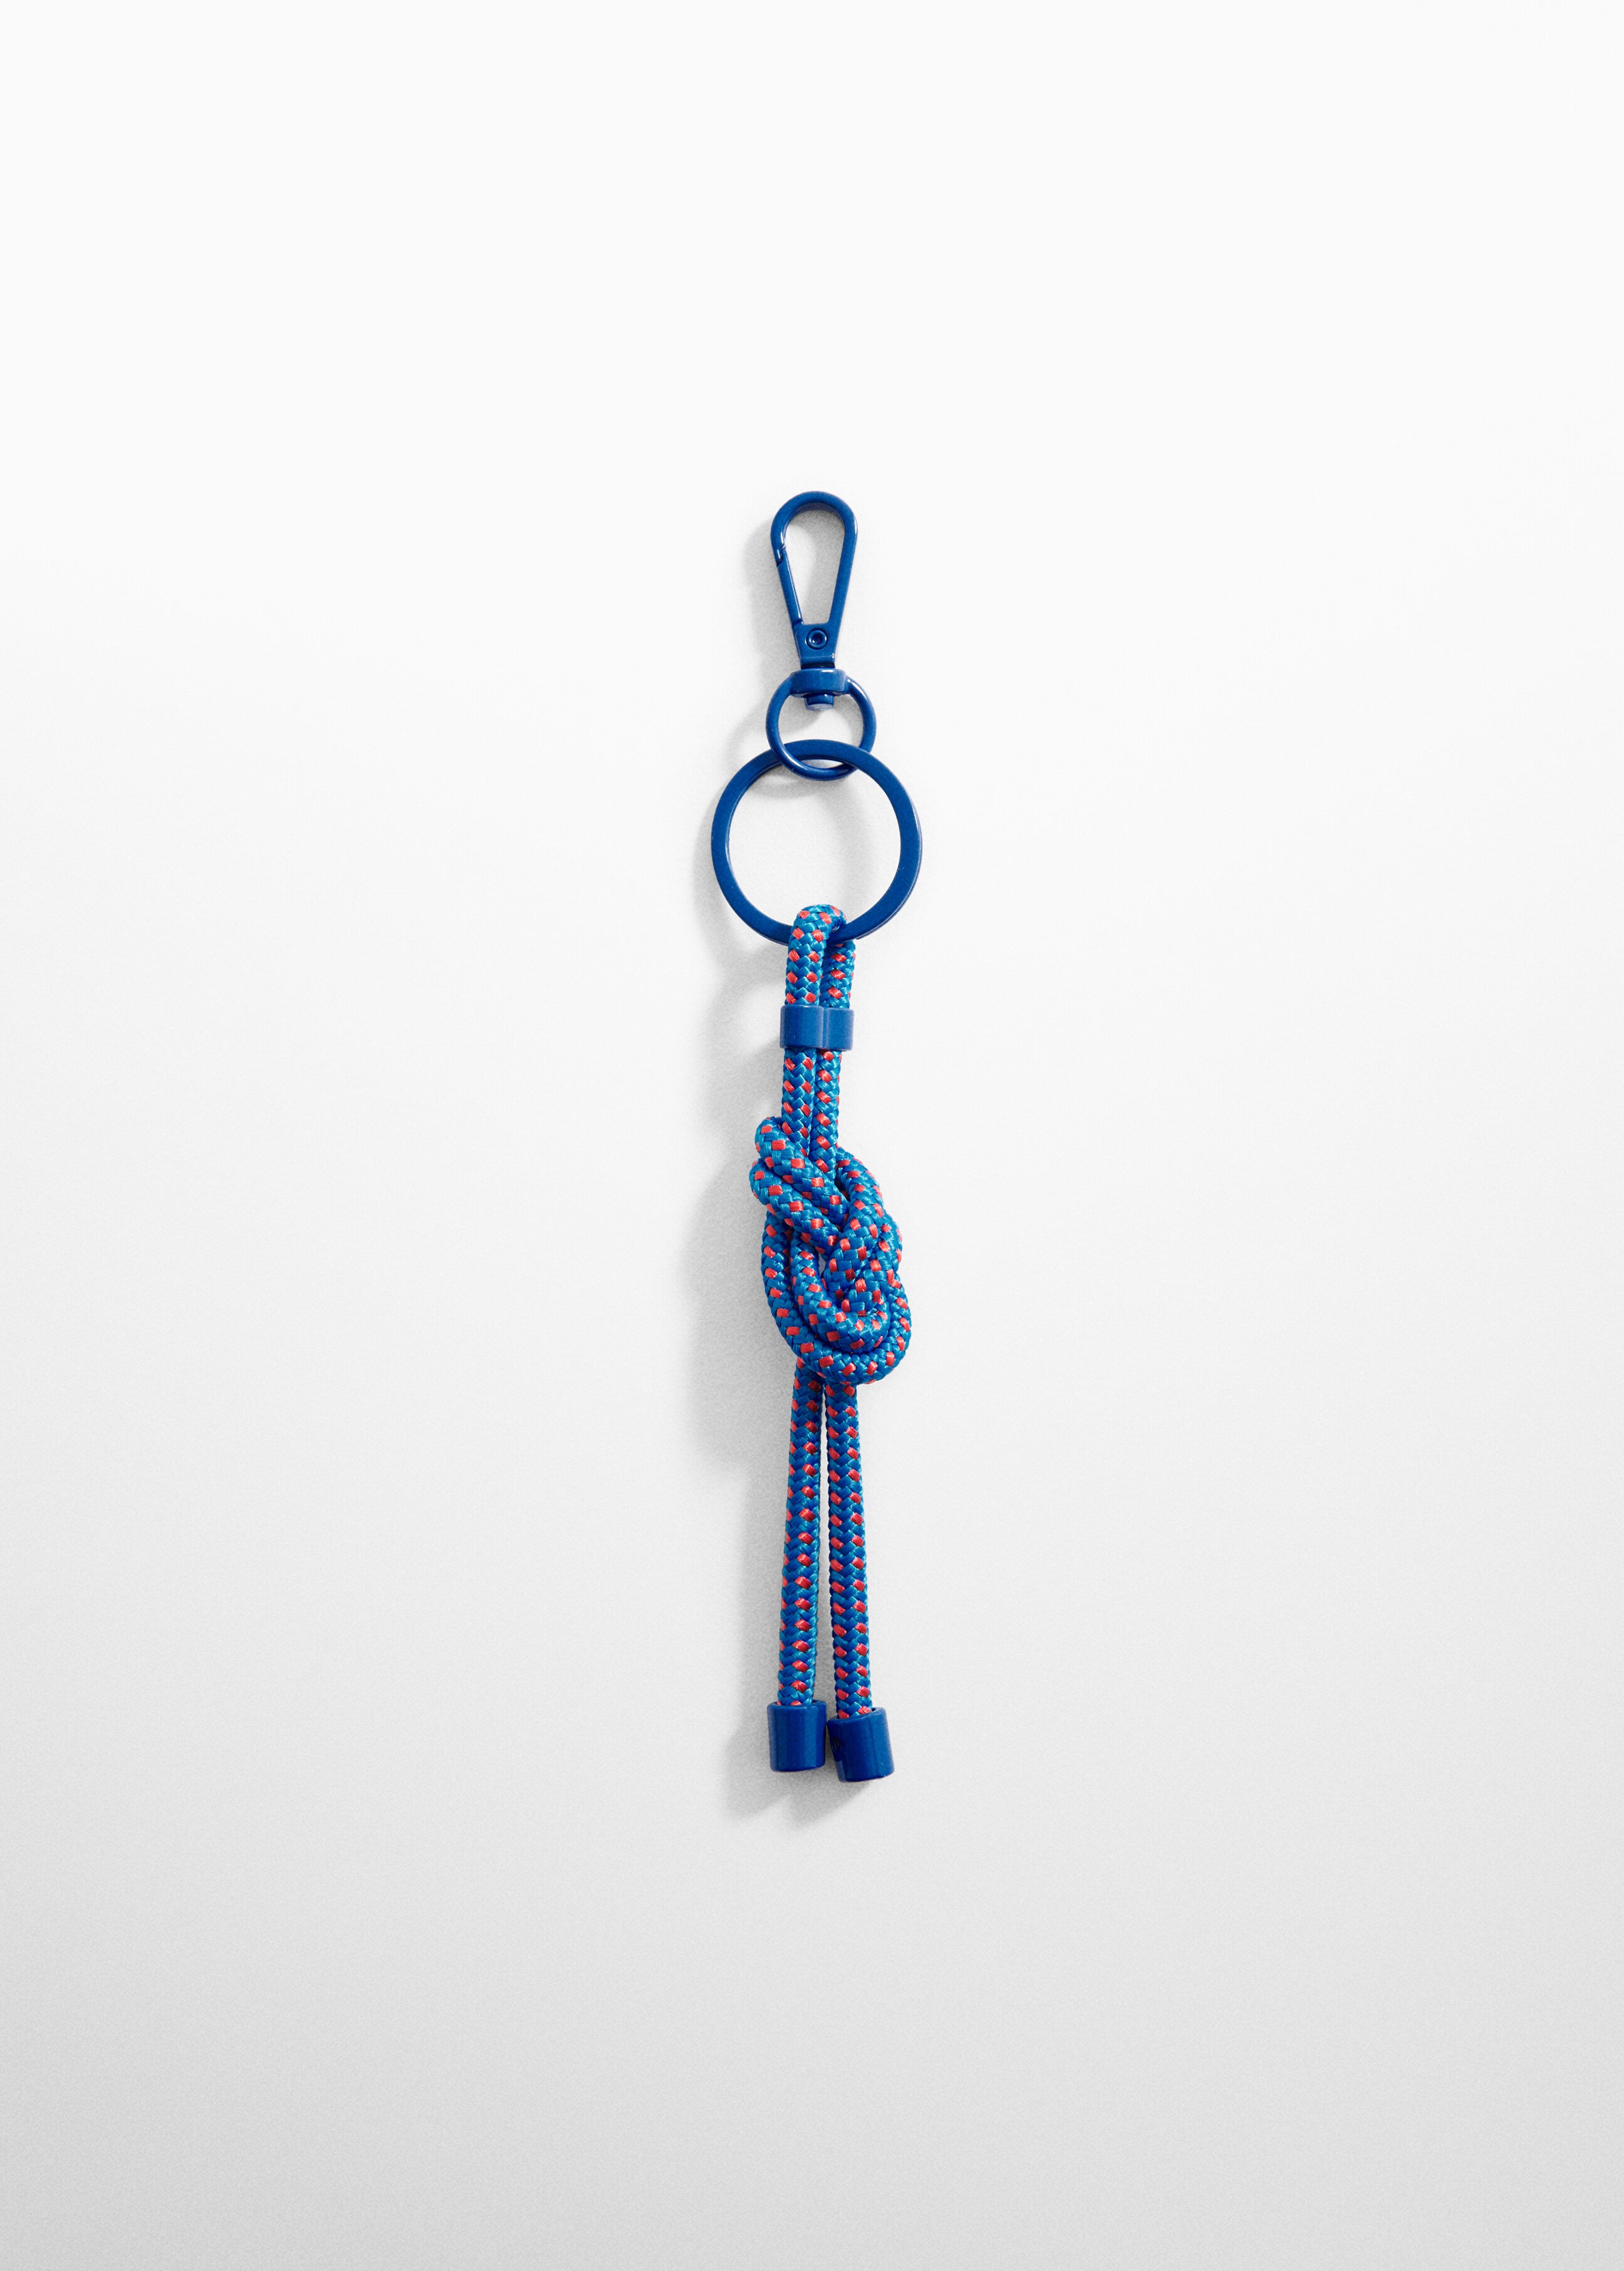 Carabiner keychain with knot - Article without model